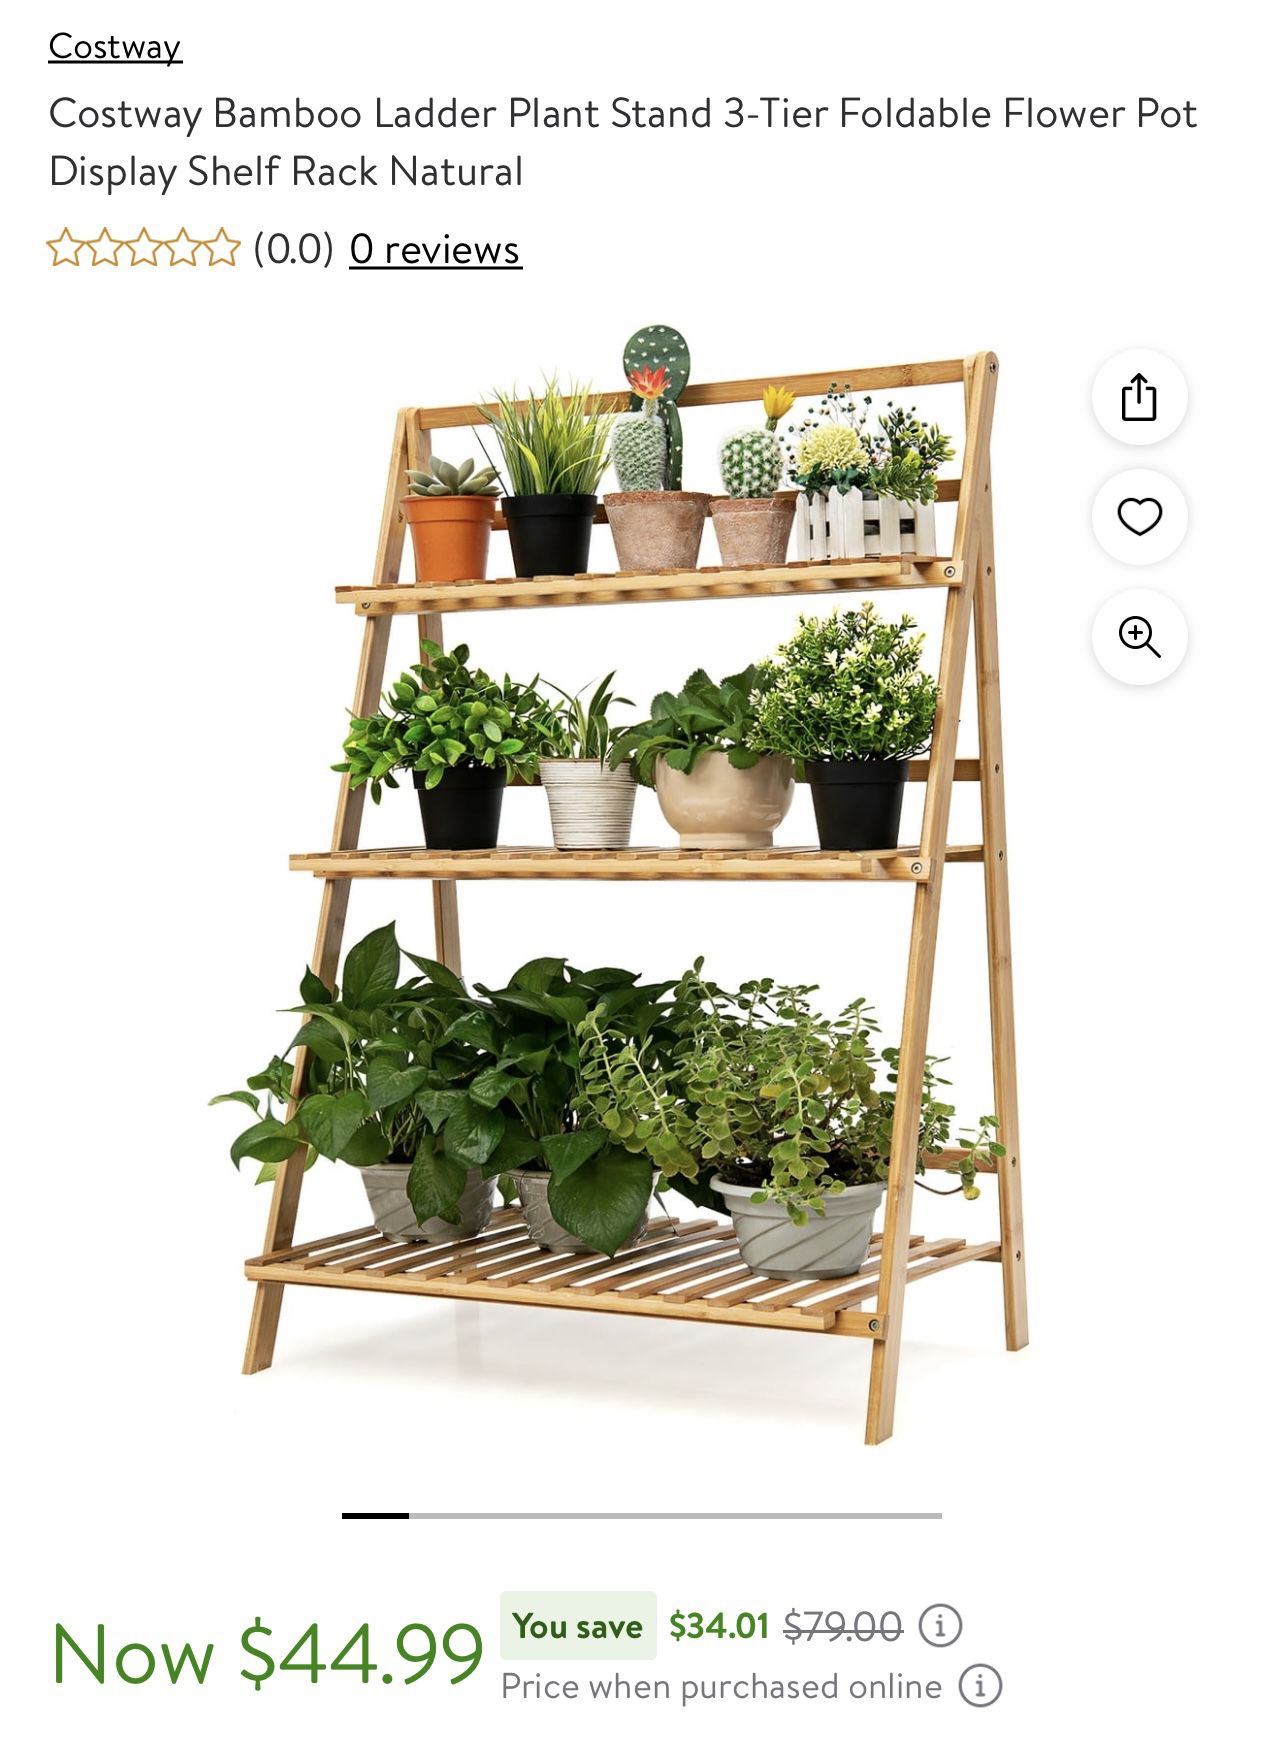 Bamboo Ladder Plant Stand